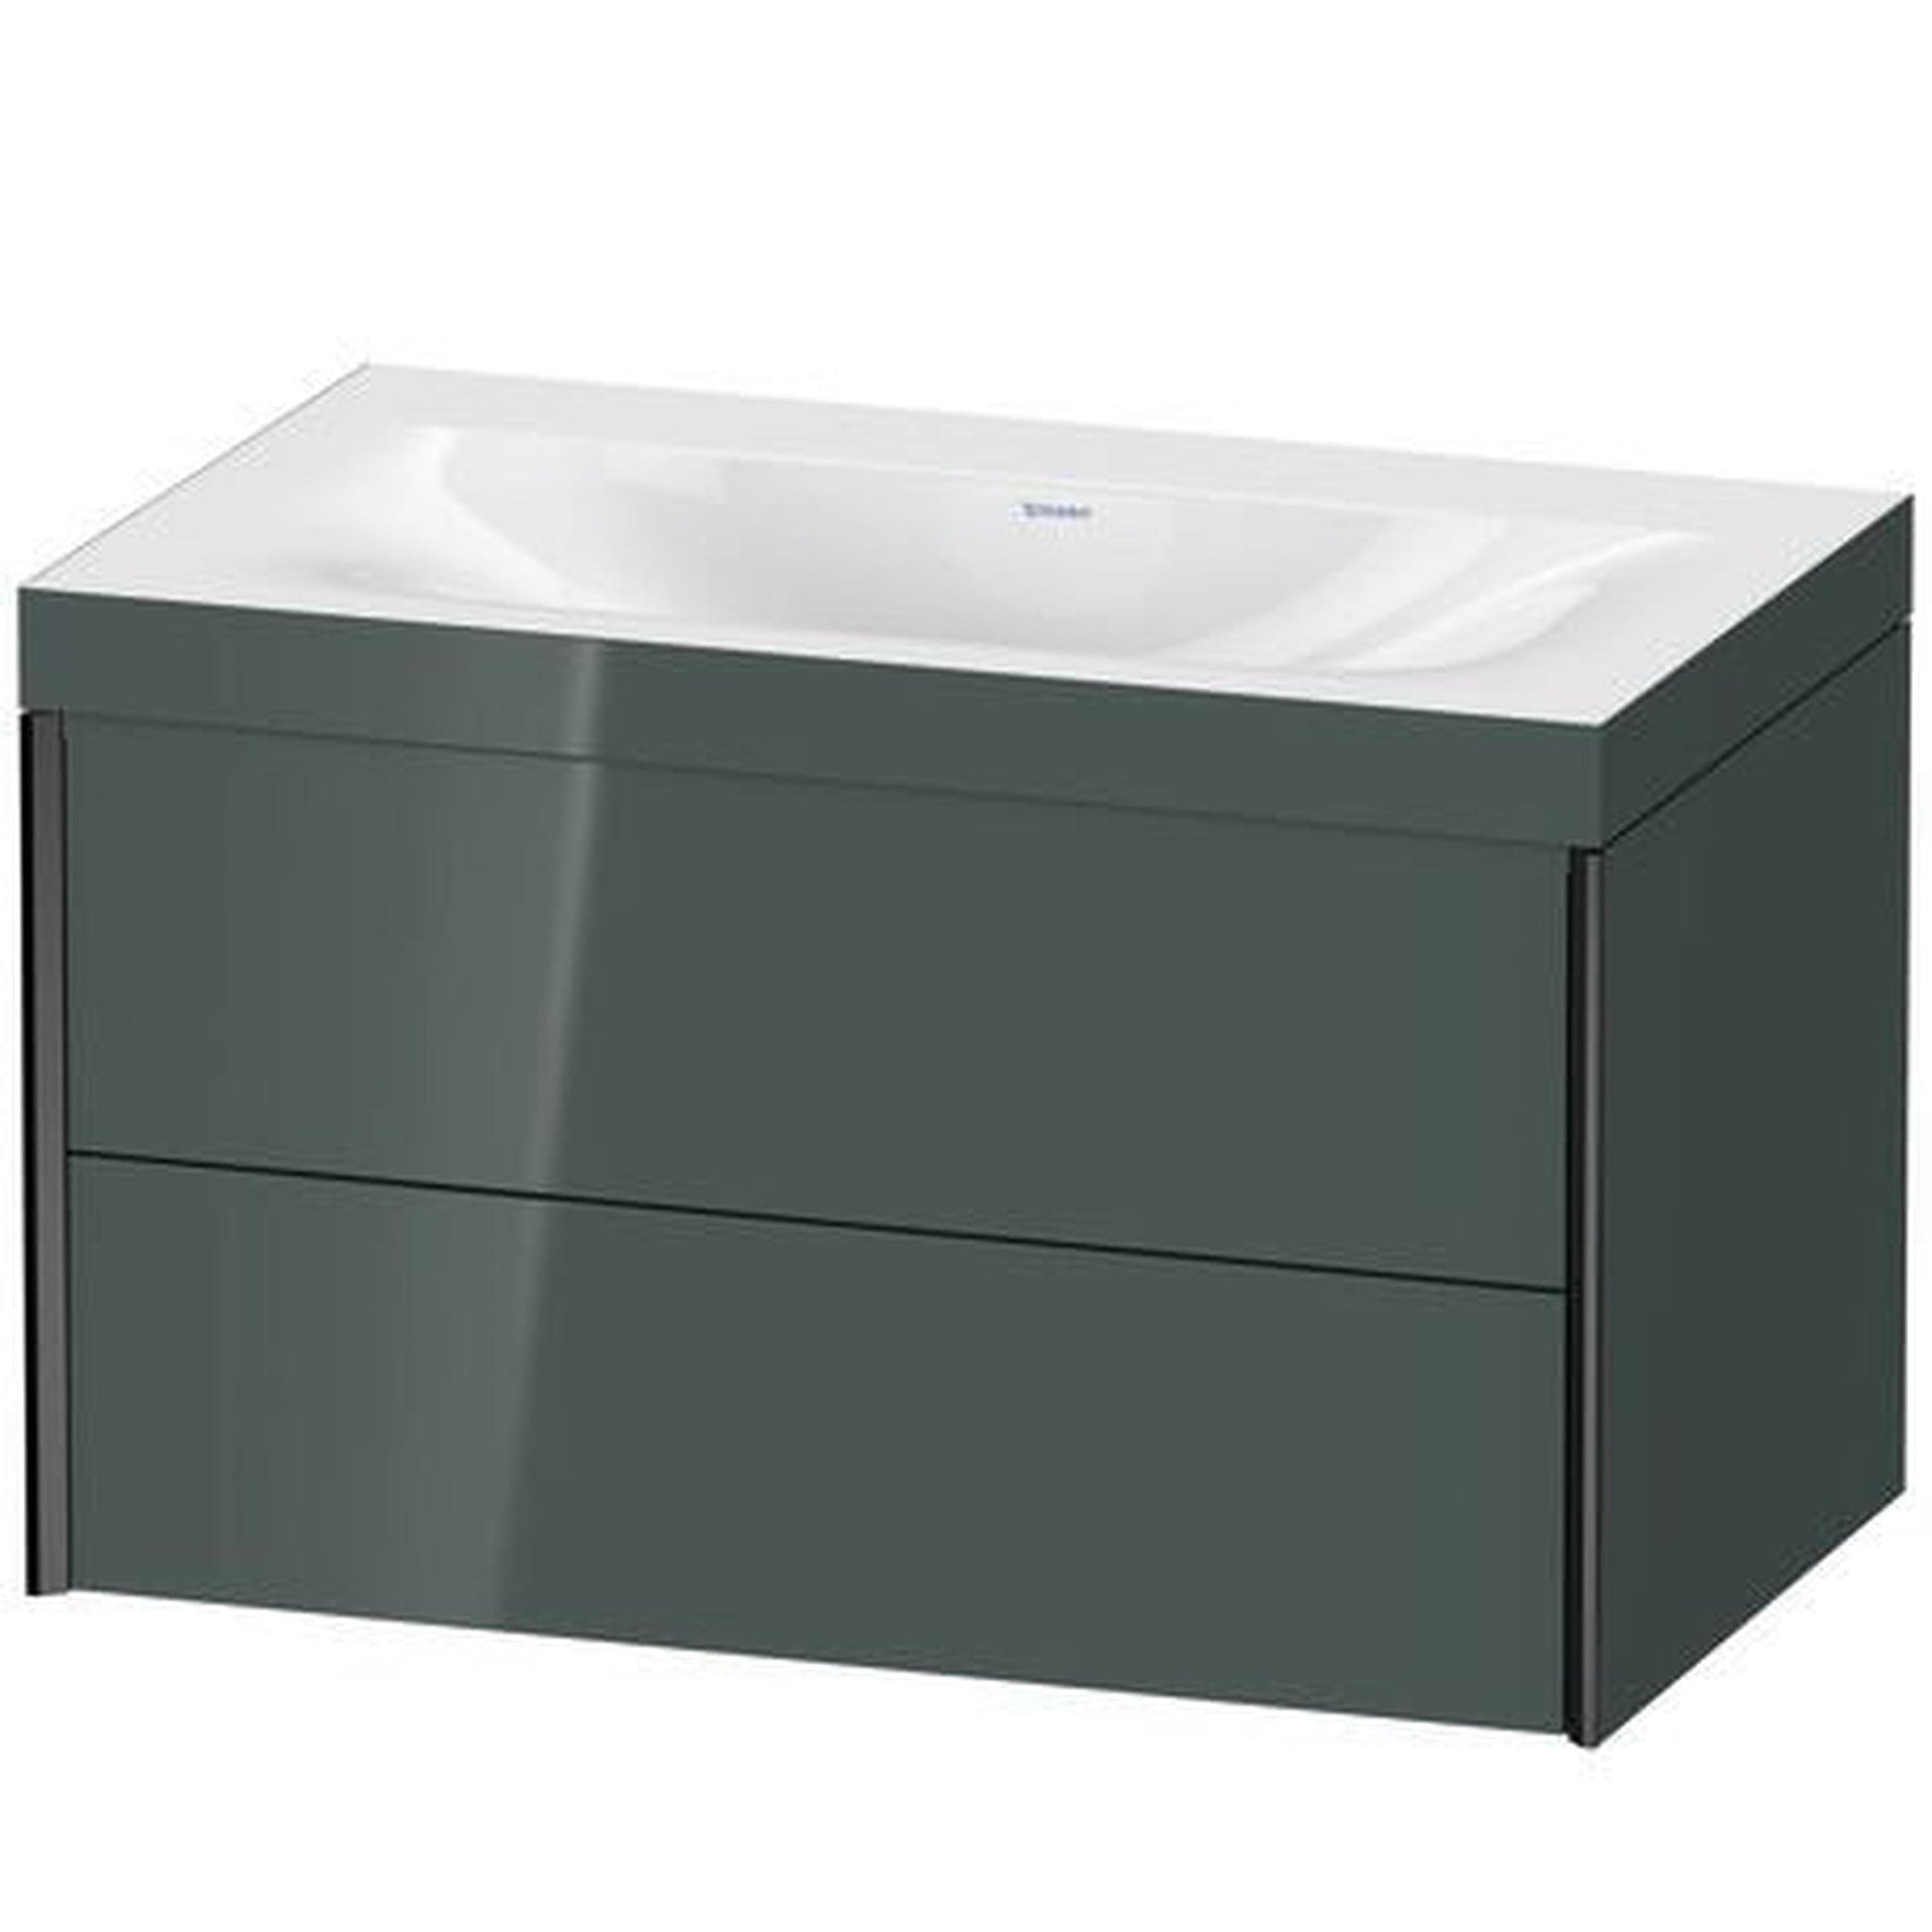 Duravit Xviu 31" x 20" x 19" Two Drawer C-Bonded Wall-Mount Vanity Kit Without Tap Hole, Dolomite Gray (XV4615NB238C)